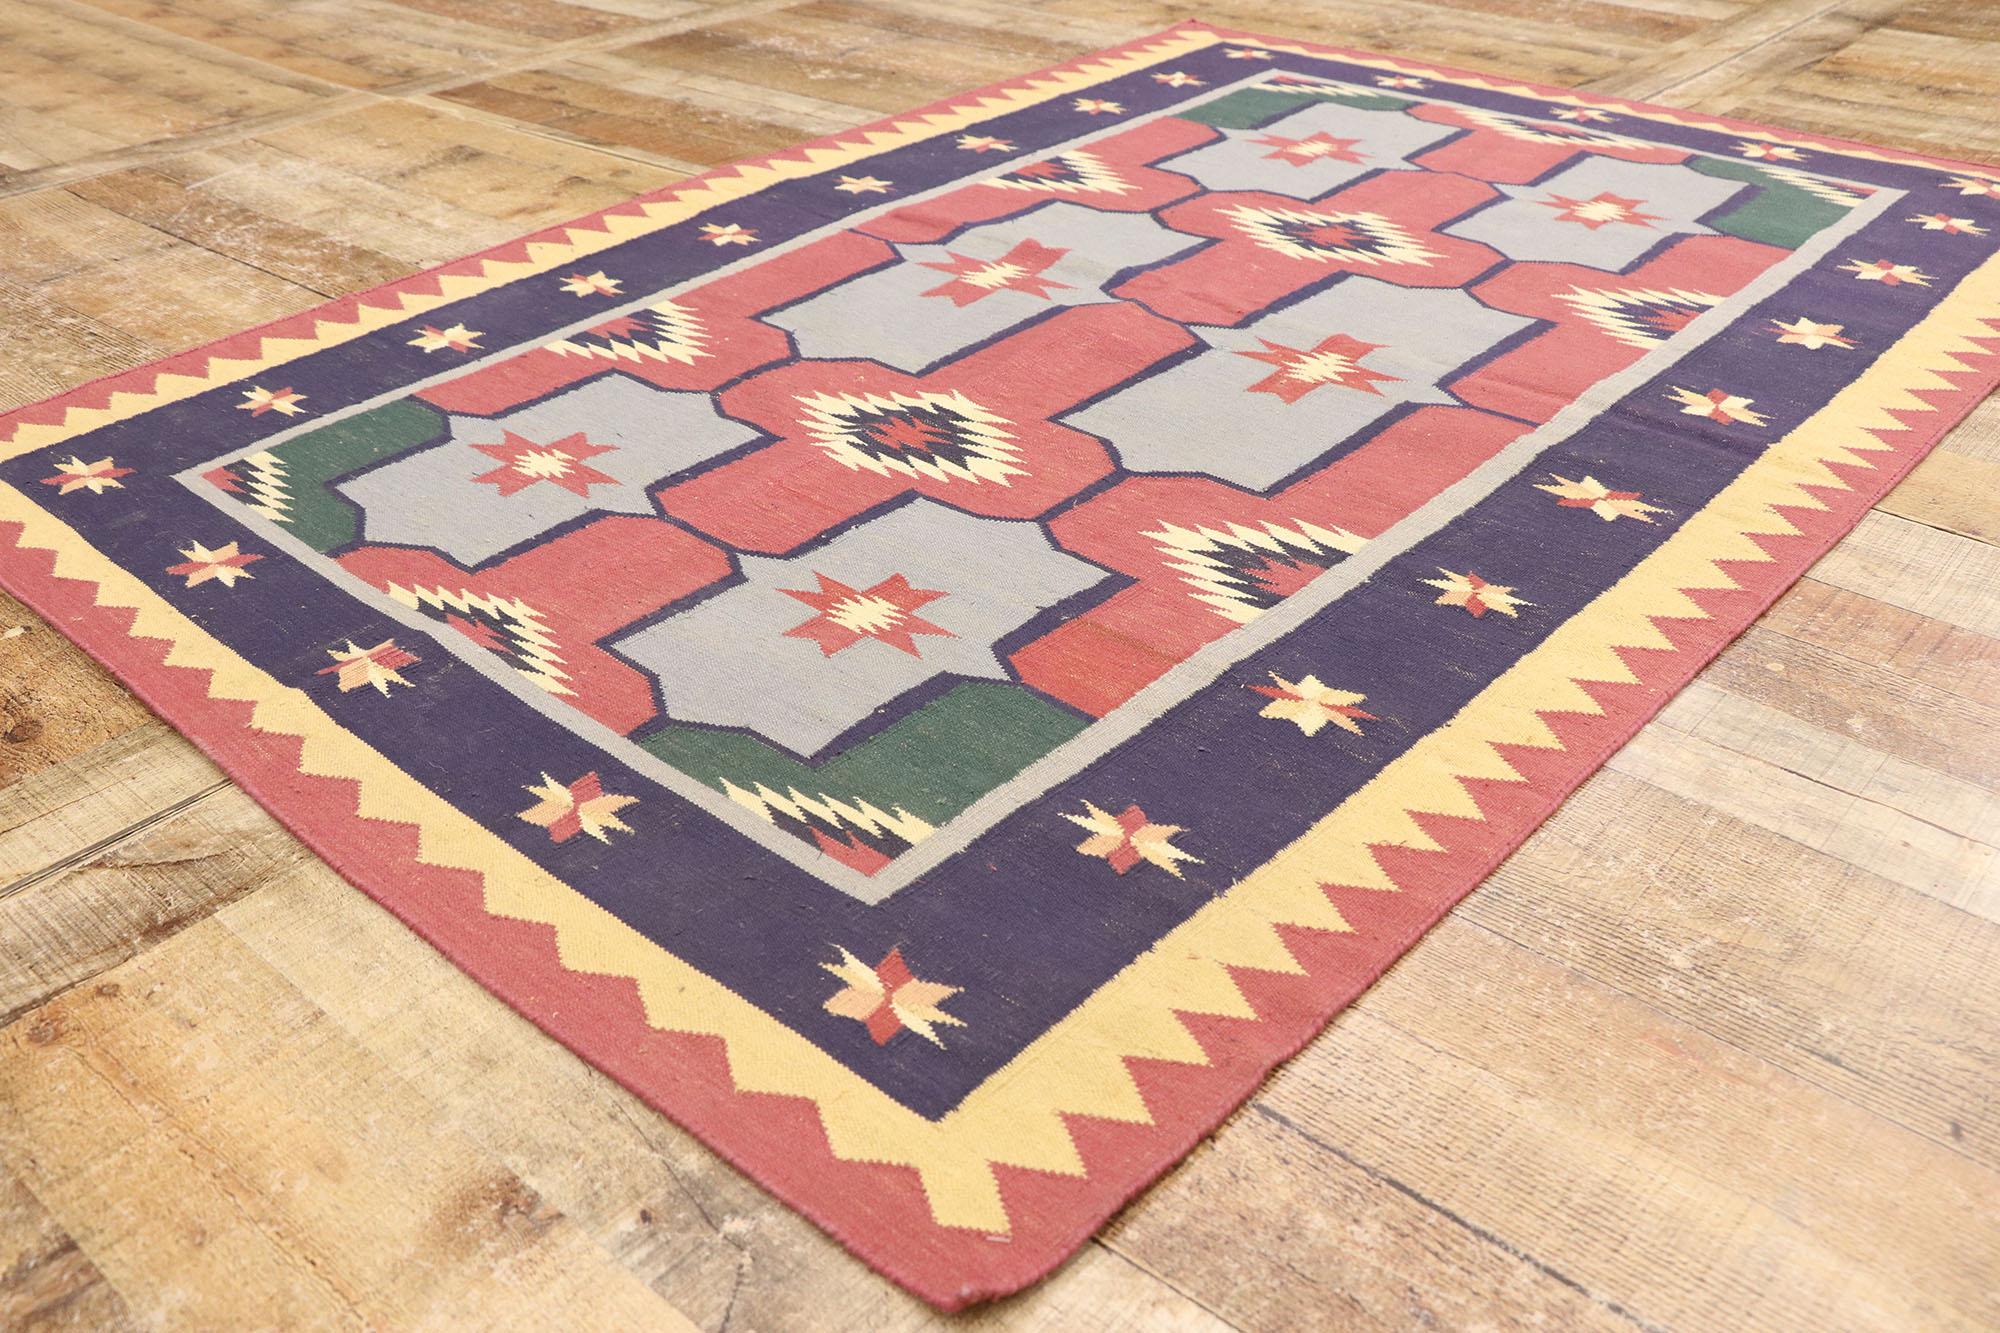 Vintage Romanian Geometric Kilim Rug with Modern Tribal Style In Good Condition For Sale In Dallas, TX